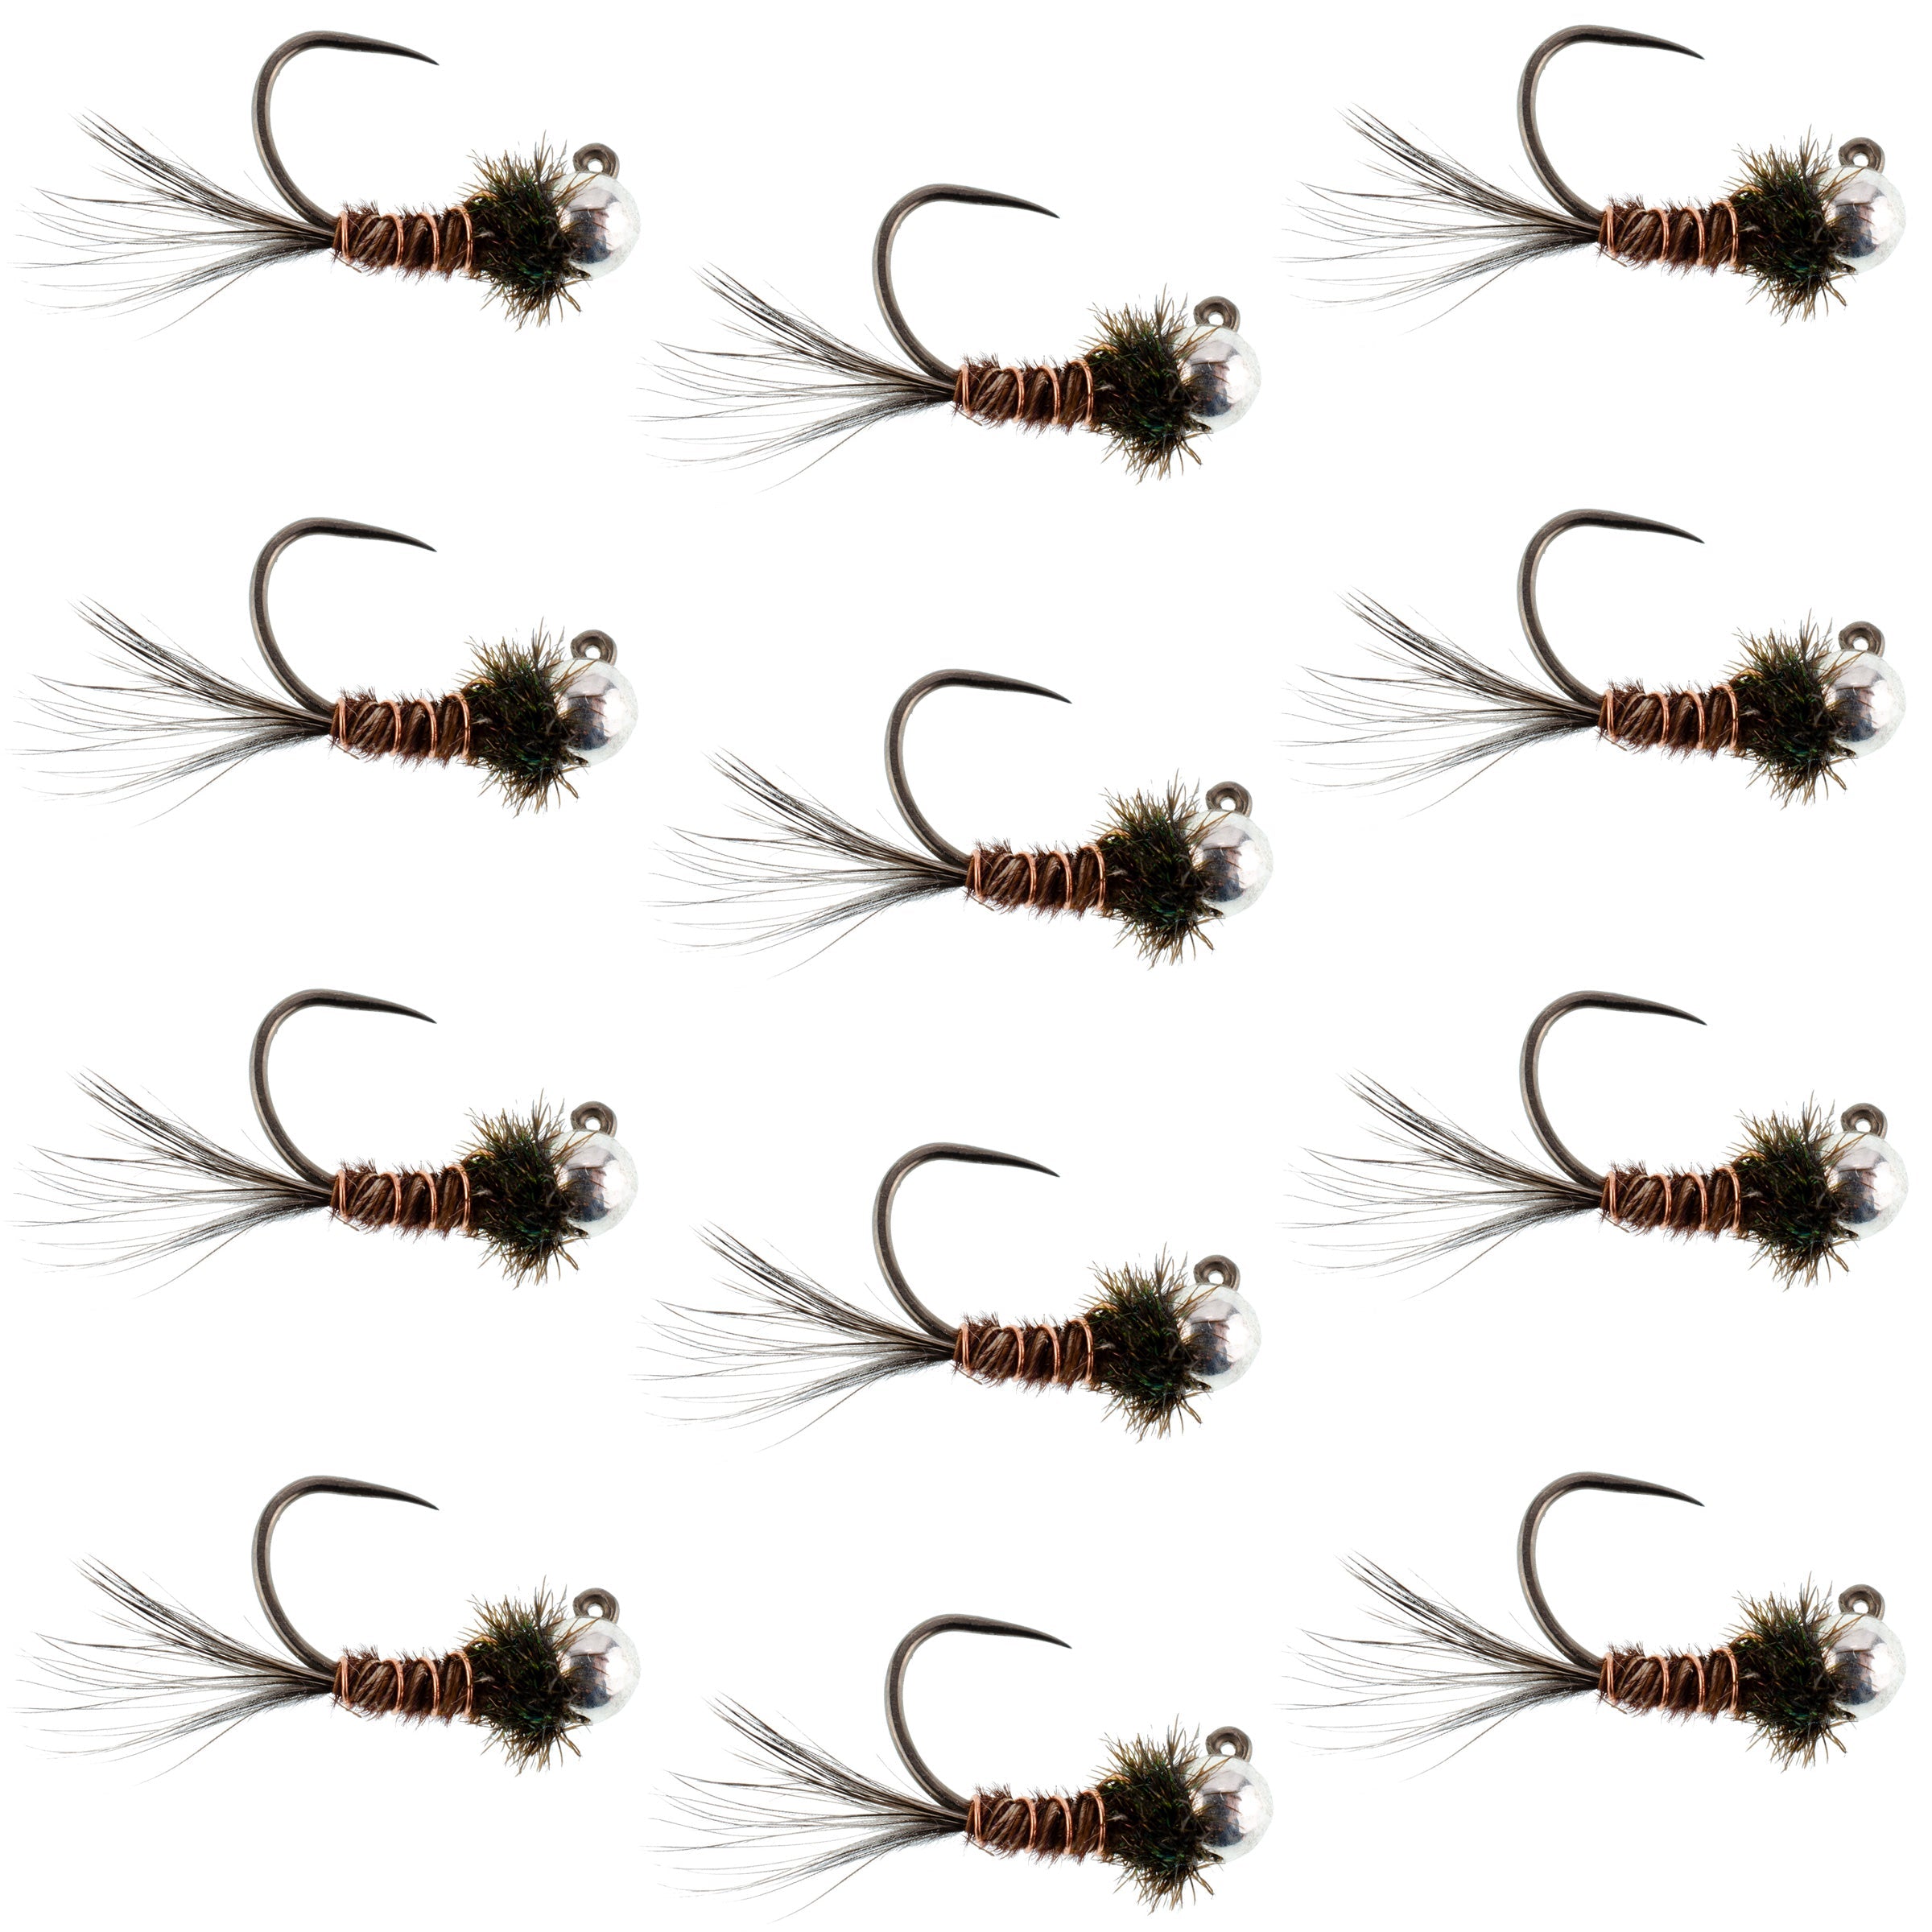 Tungsten Bead Pheasant Tail Tactical Jig Czech Nymph Euro Nymphing Fly